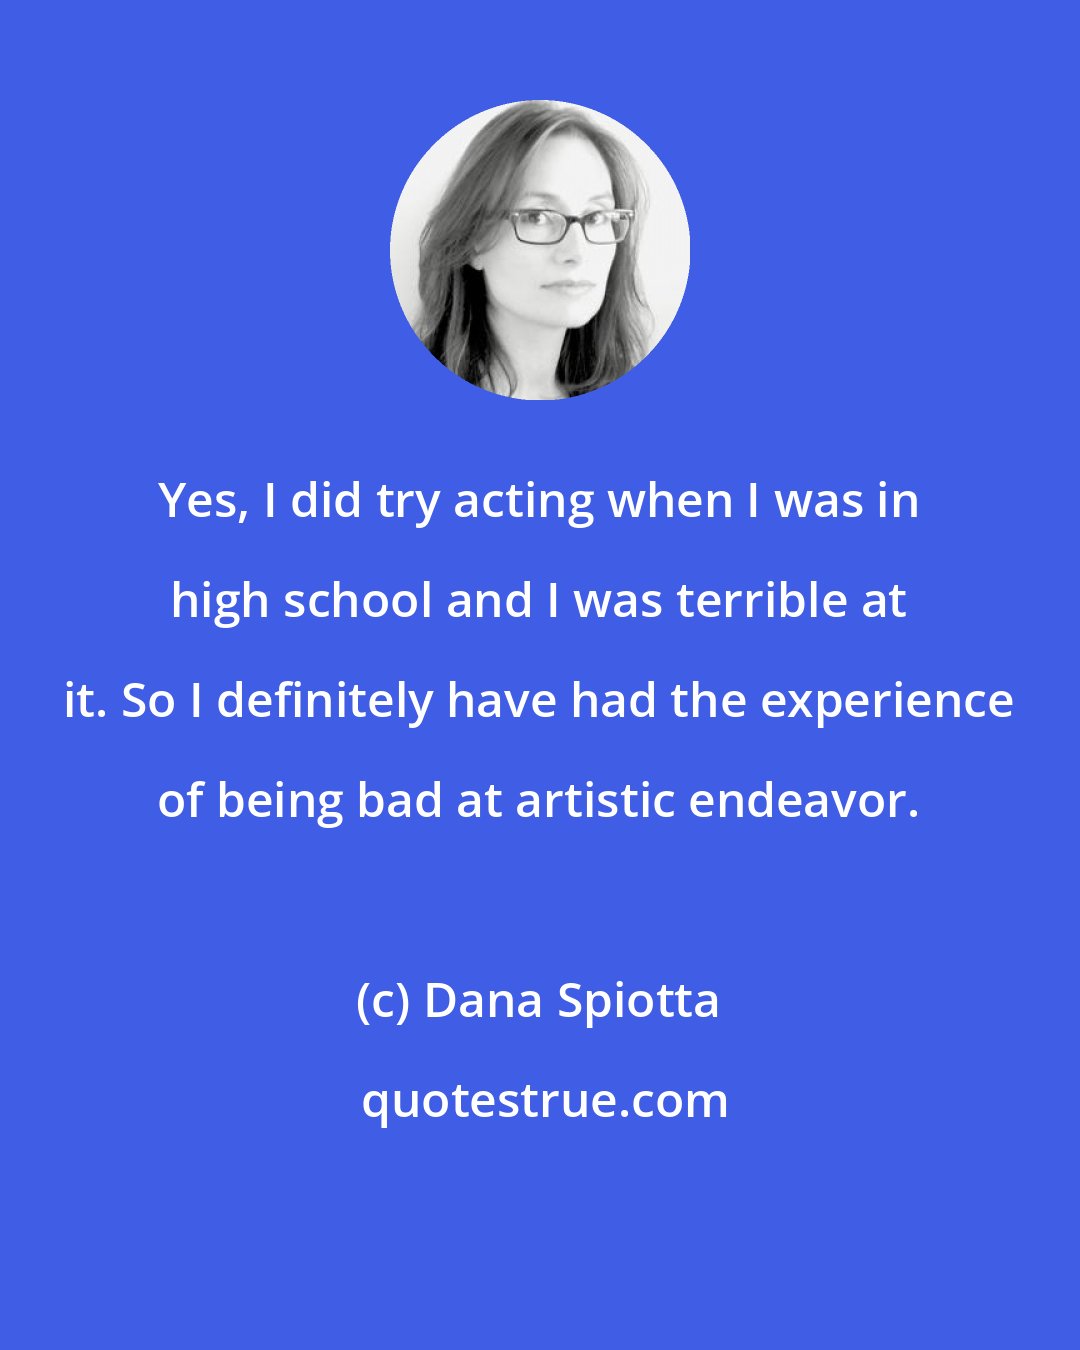 Dana Spiotta: Yes, I did try acting when I was in high school and I was terrible at it. So I definitely have had the experience of being bad at artistic endeavor.